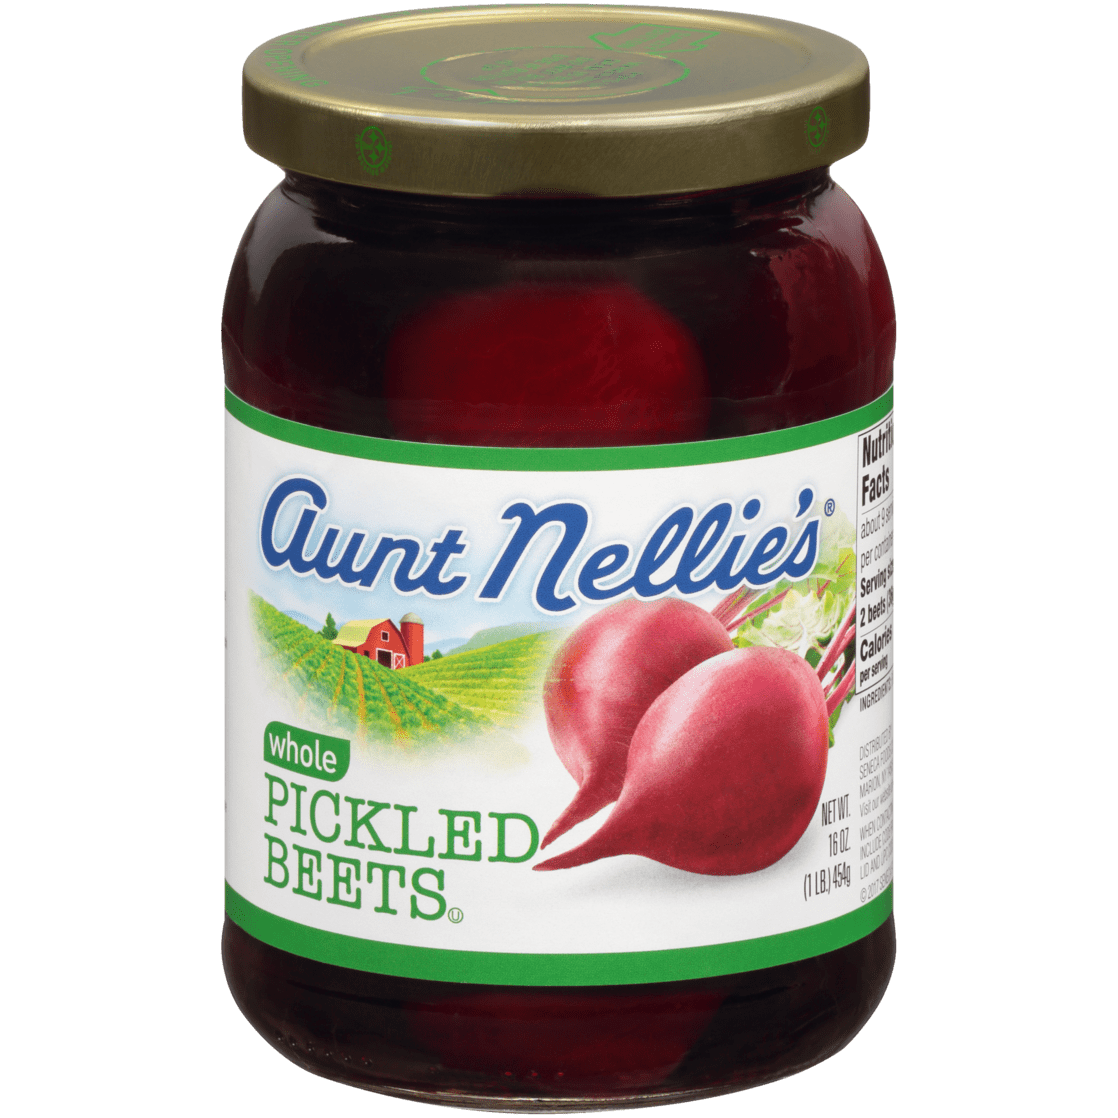 Aunt Nellie's Whole Pickled Beets Jar, 16 oz